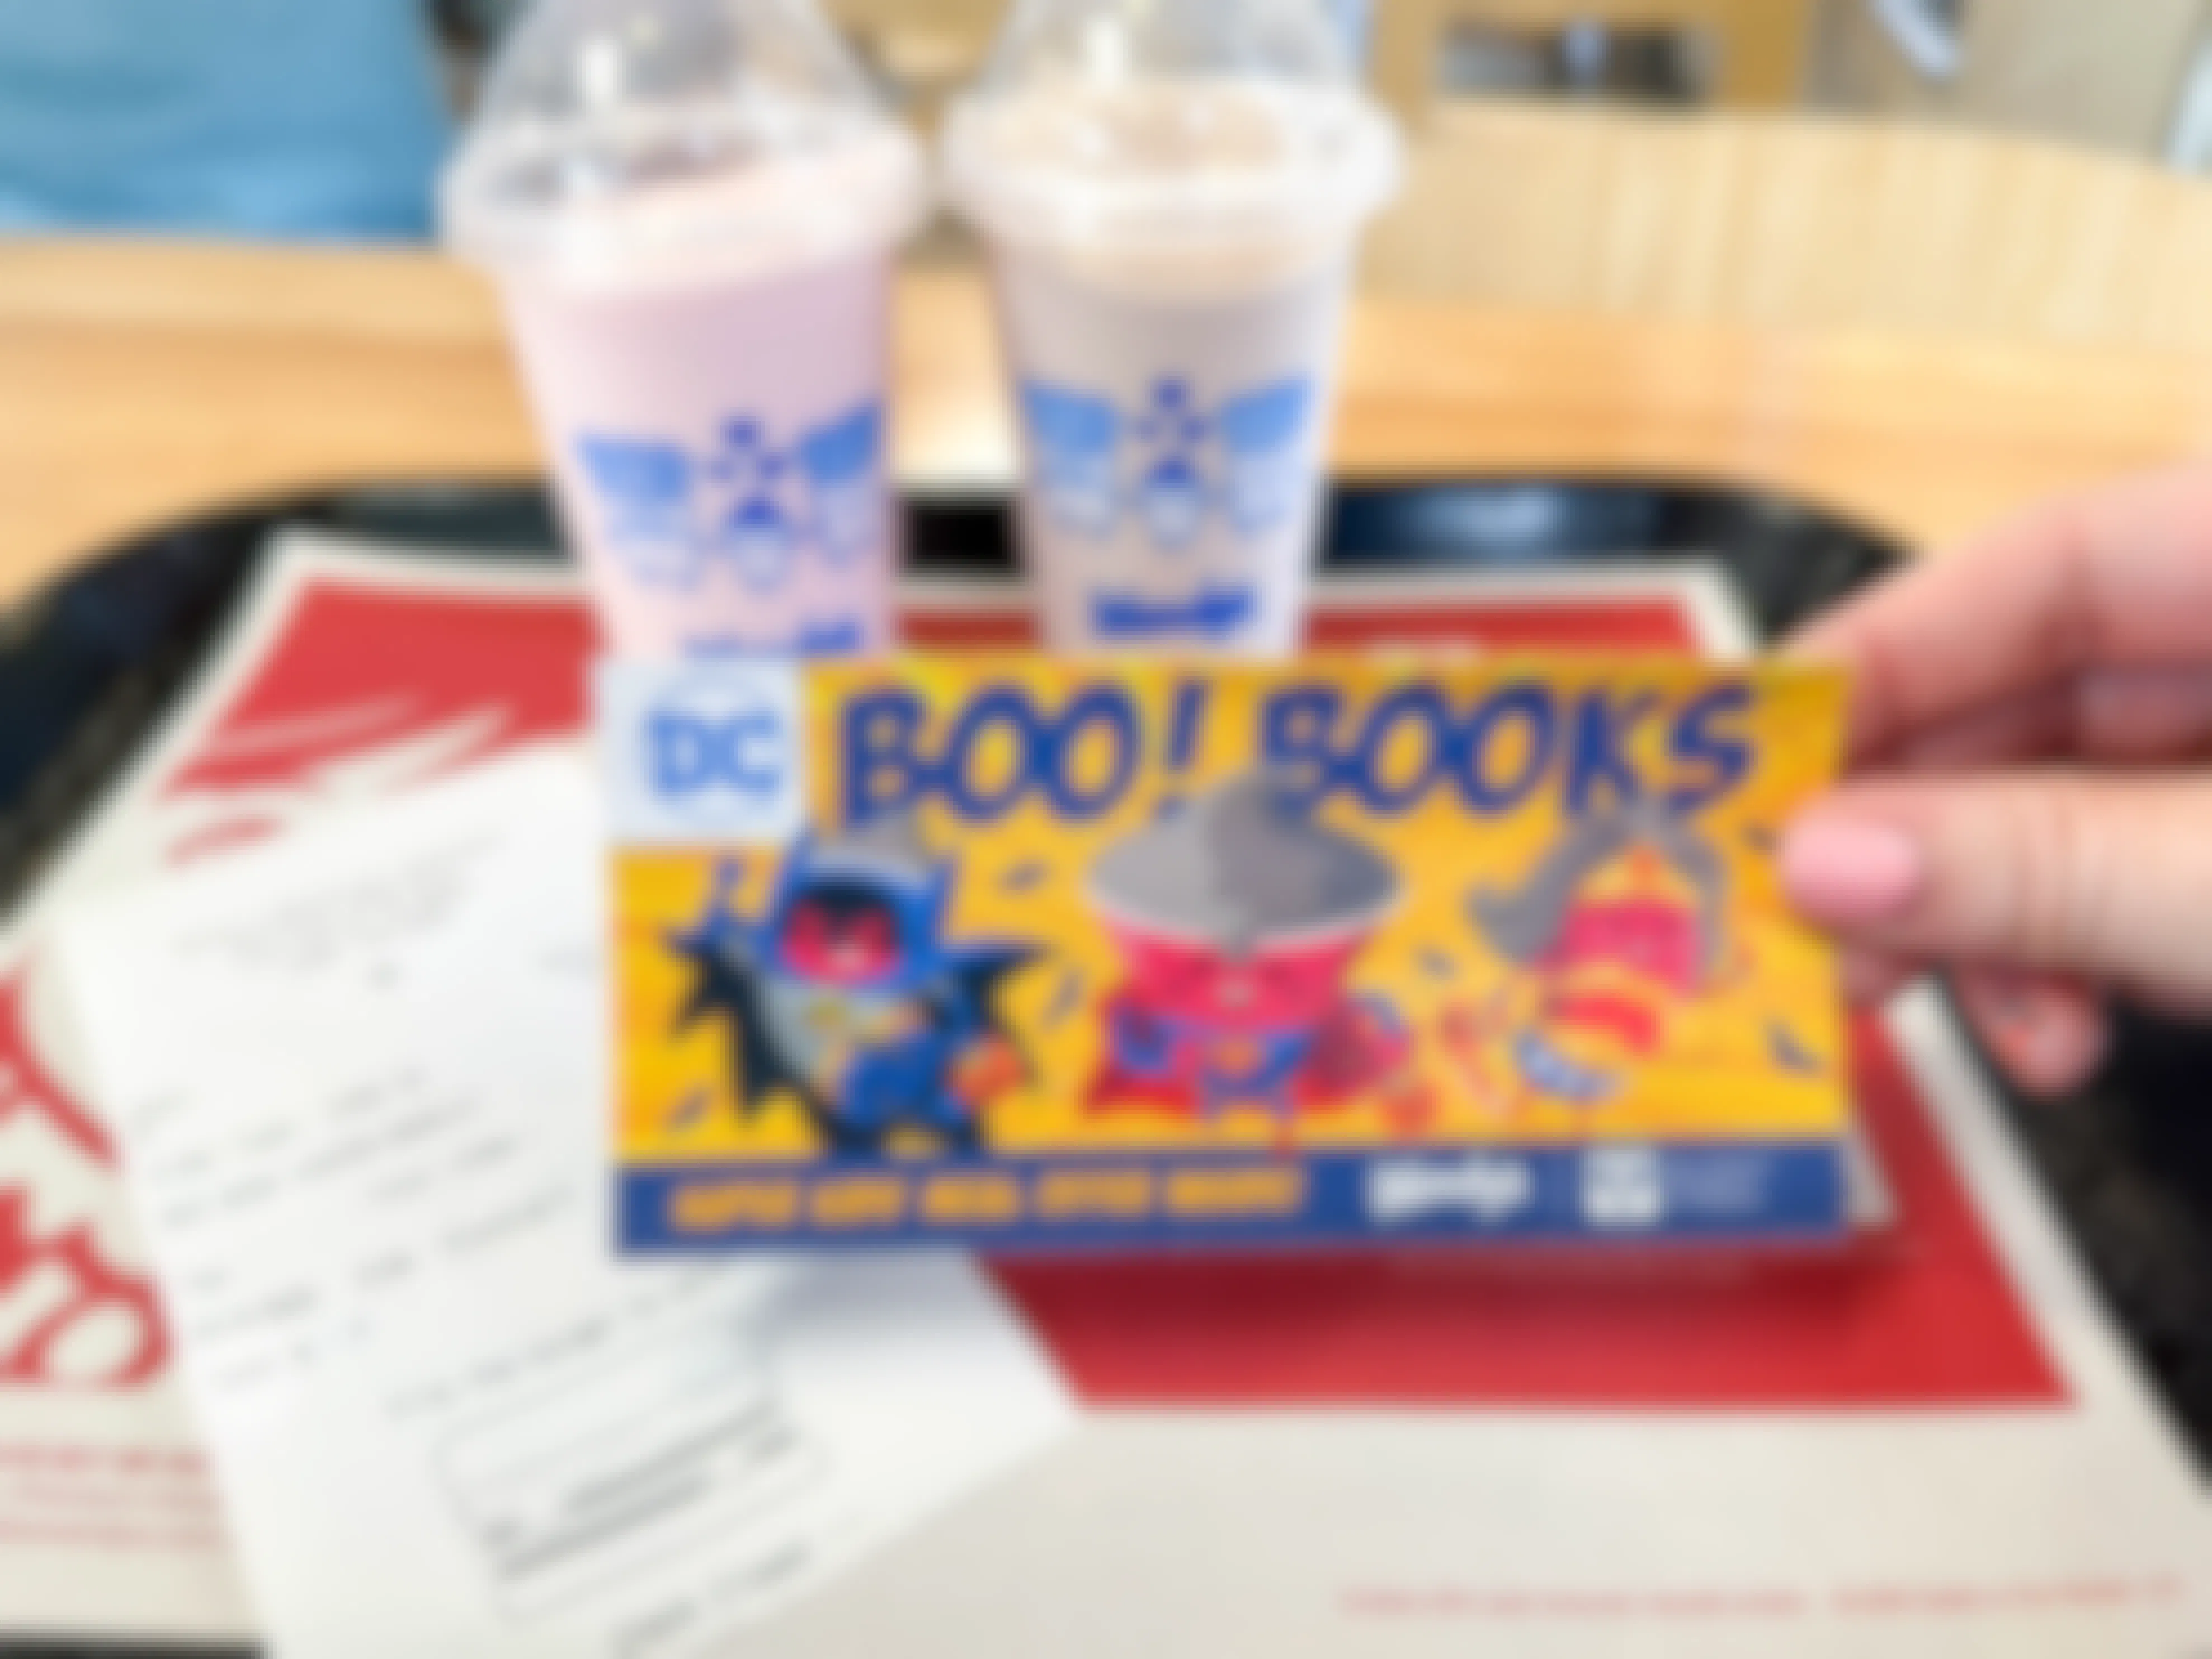 a person holding a wendys boo books in front of two frostys and receipt on tray 